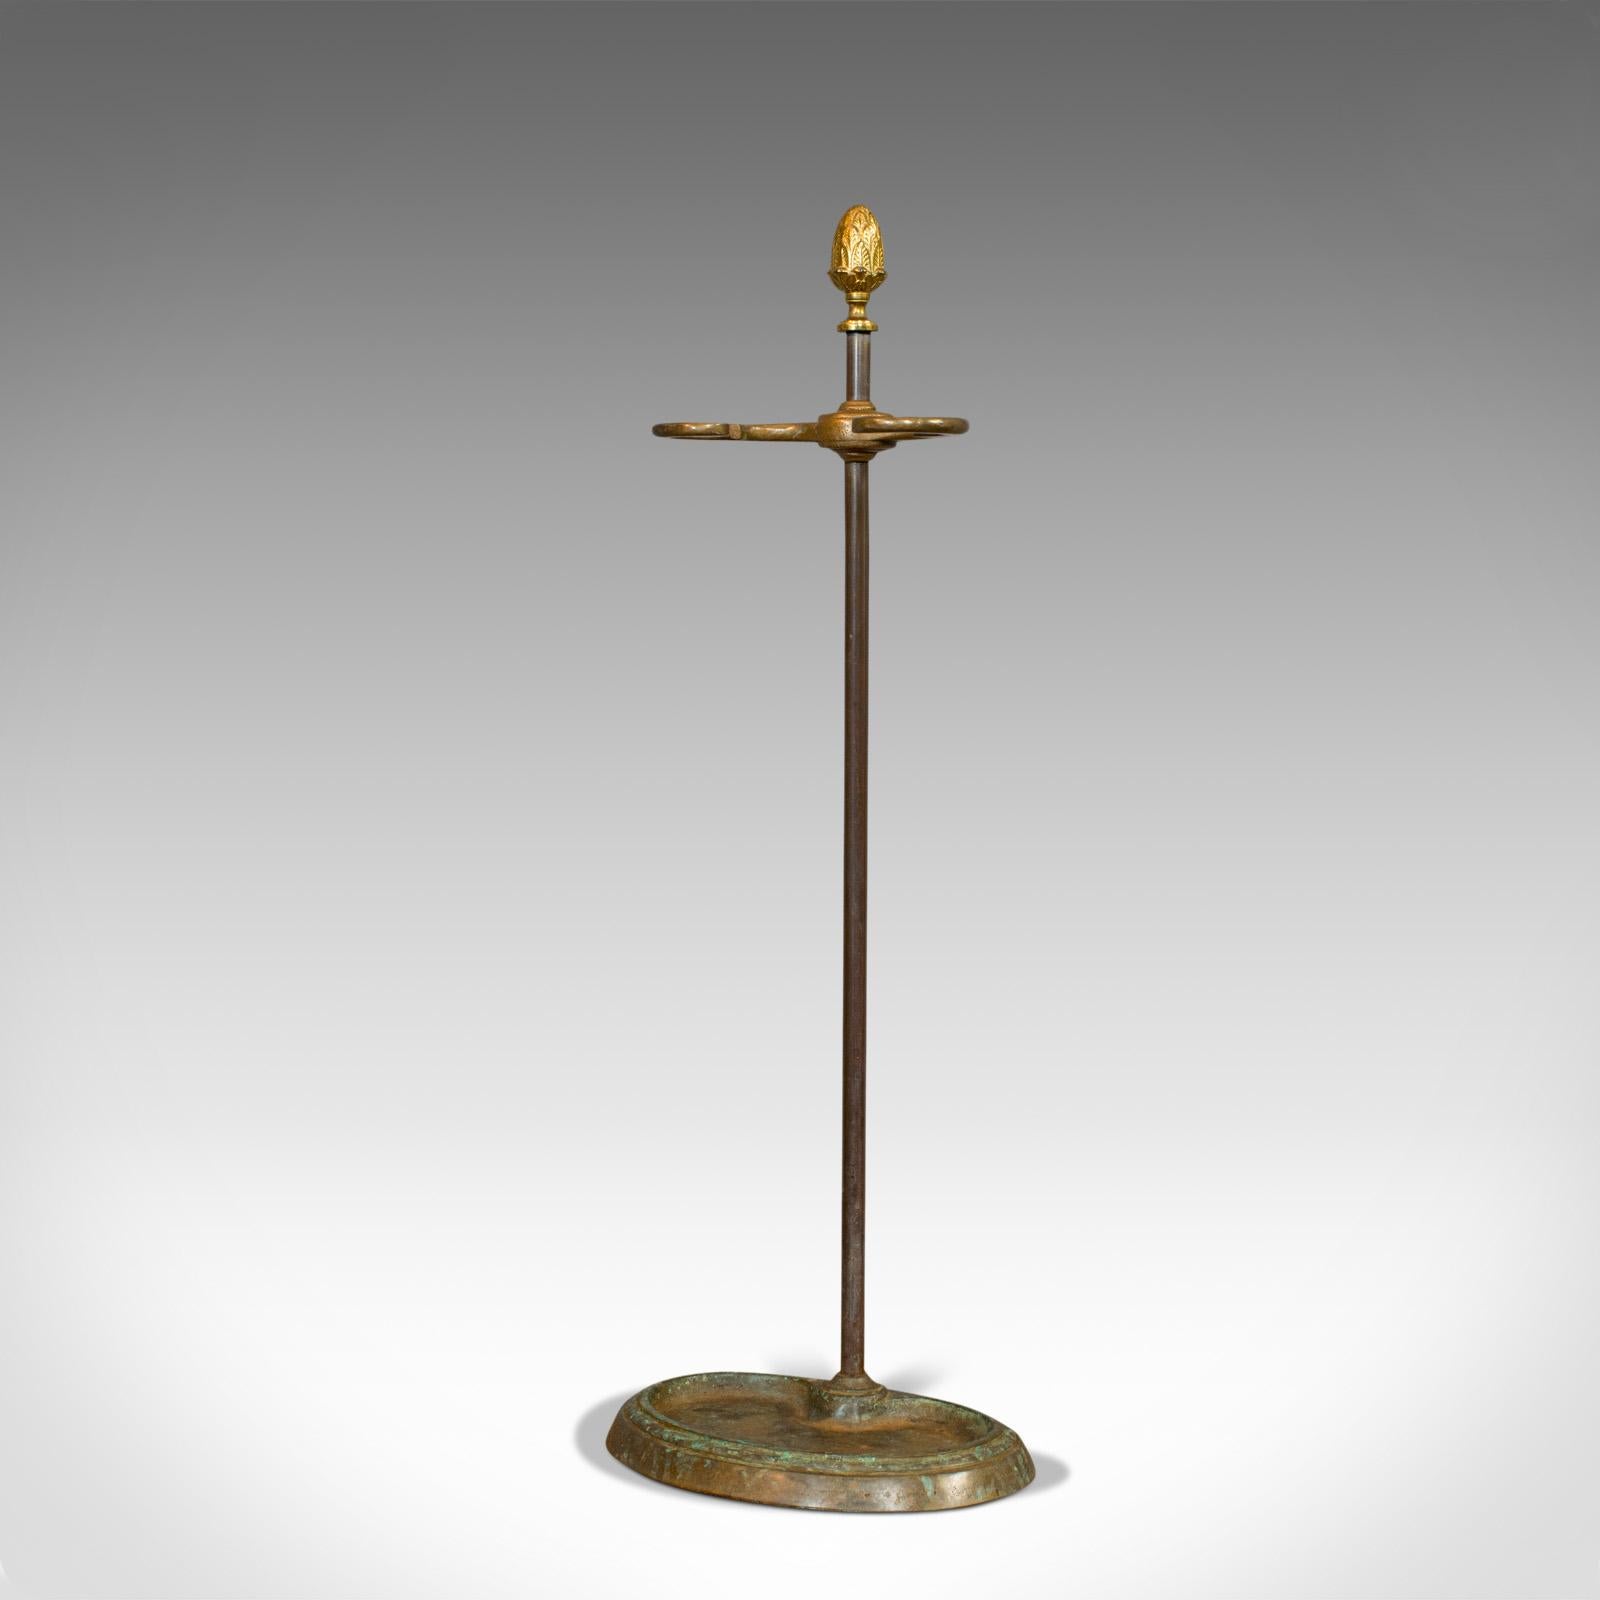 This is an antique umbrella stand. A French, bronze hallway cane or stick rack, dating to the Art Nouveau period, circa 1900.

Graceful French taste
Displaying a desirable aged patina
Antique bronze shows appealing weathering